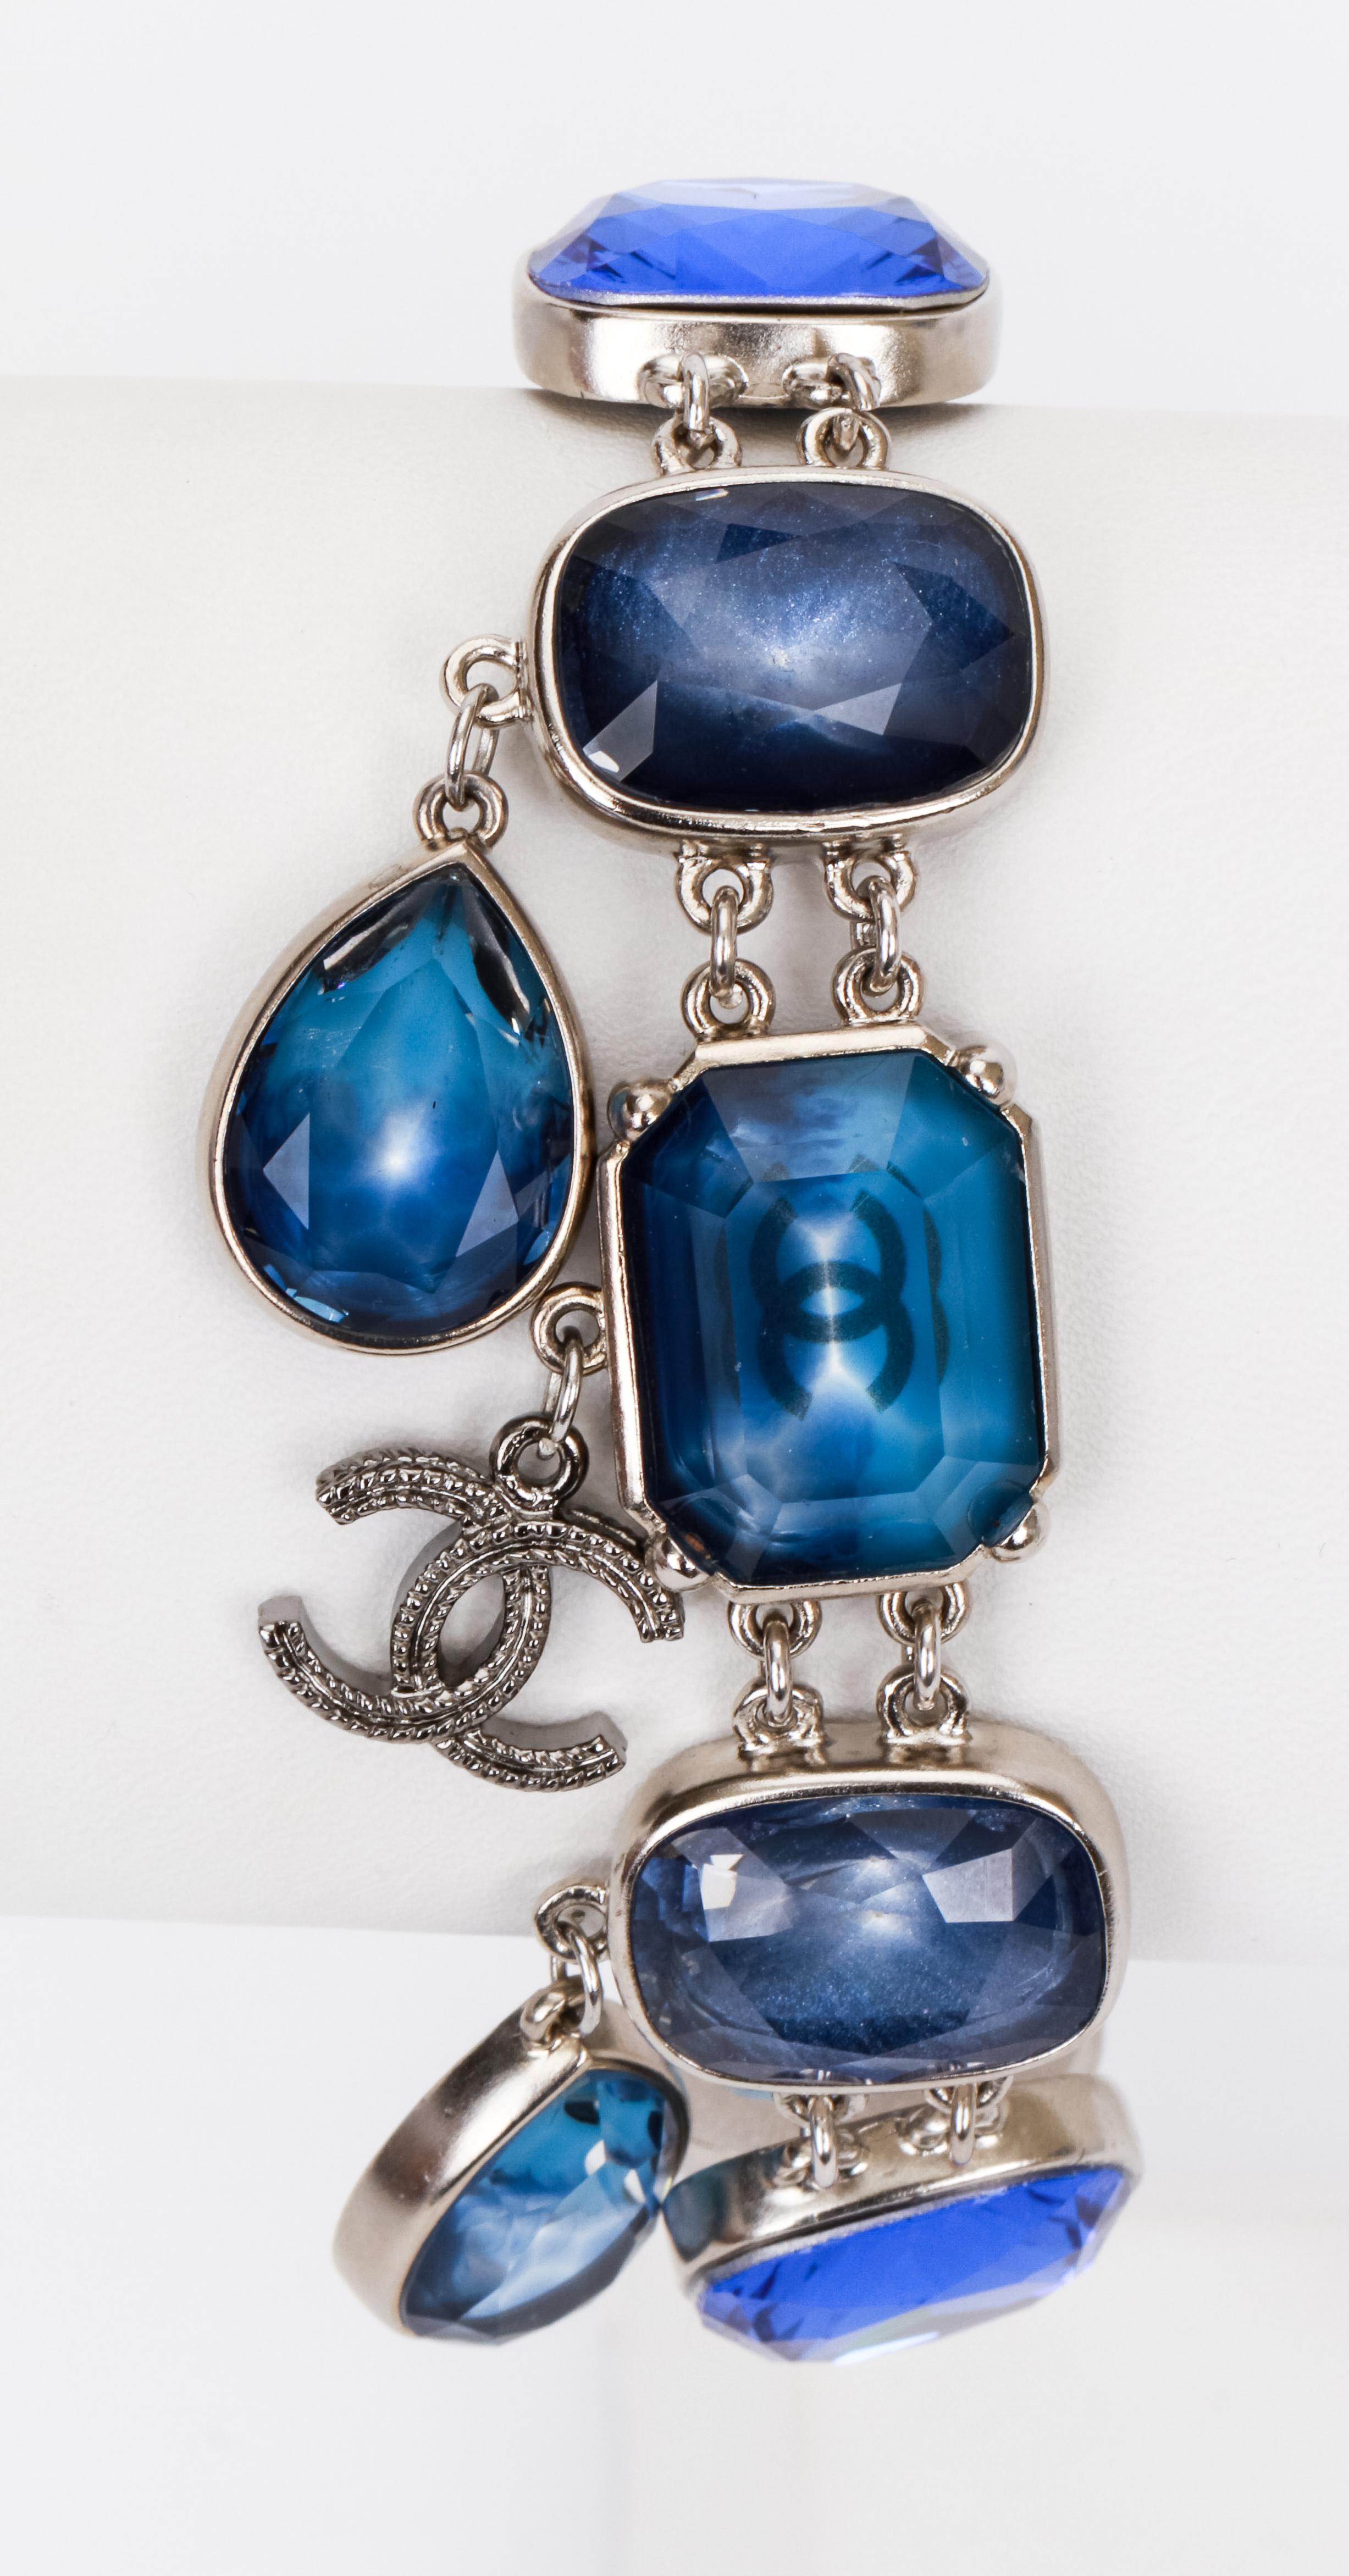 Chanel blue stones bracelet mixed cuts with CC and pear shape charms. Comes with original pouch.